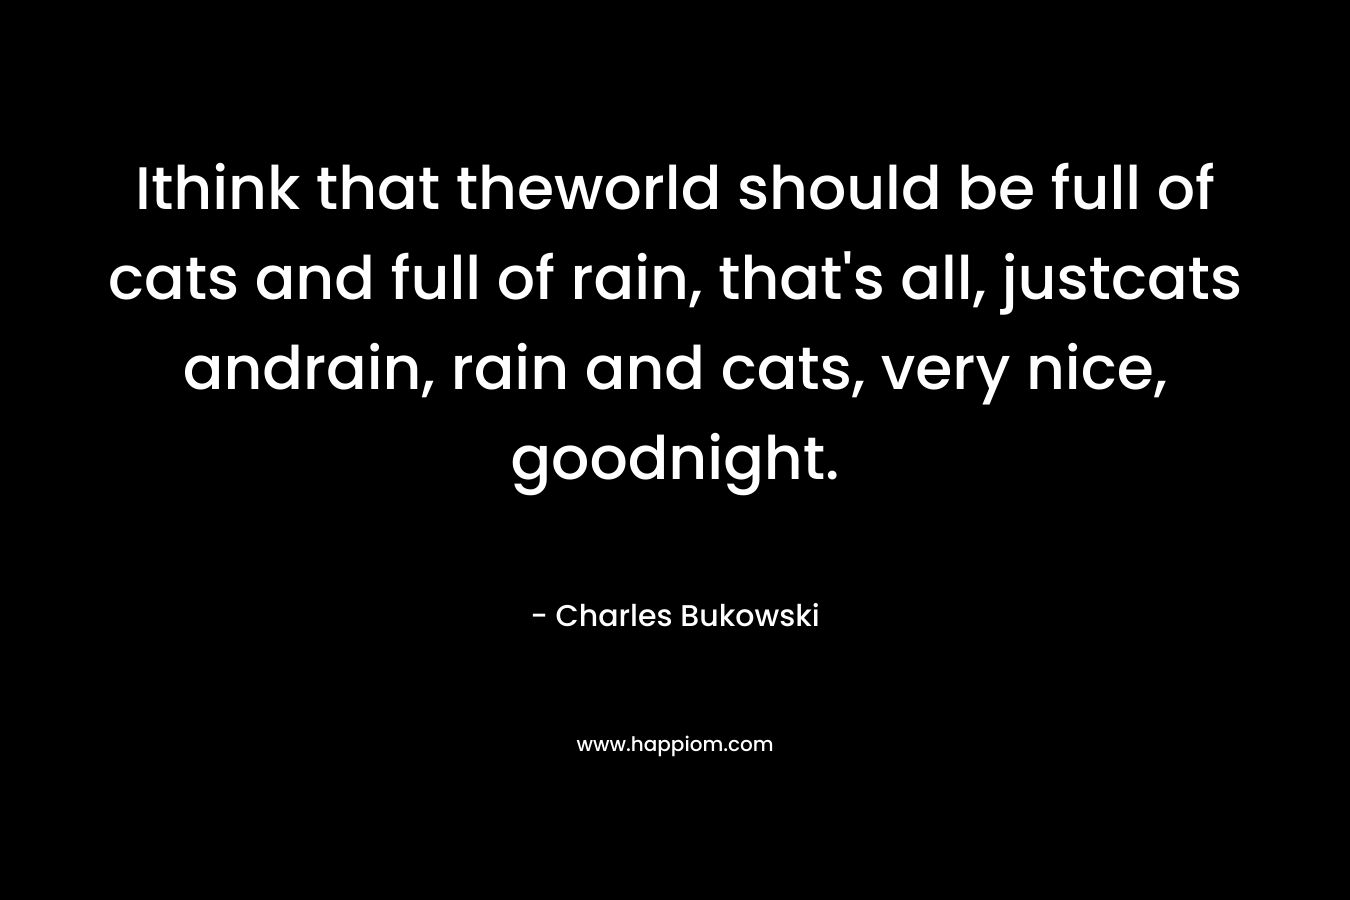 Ithink that theworld should be full of cats and full of rain, that’s all, justcats andrain, rain and cats, very nice, goodnight. – Charles Bukowski